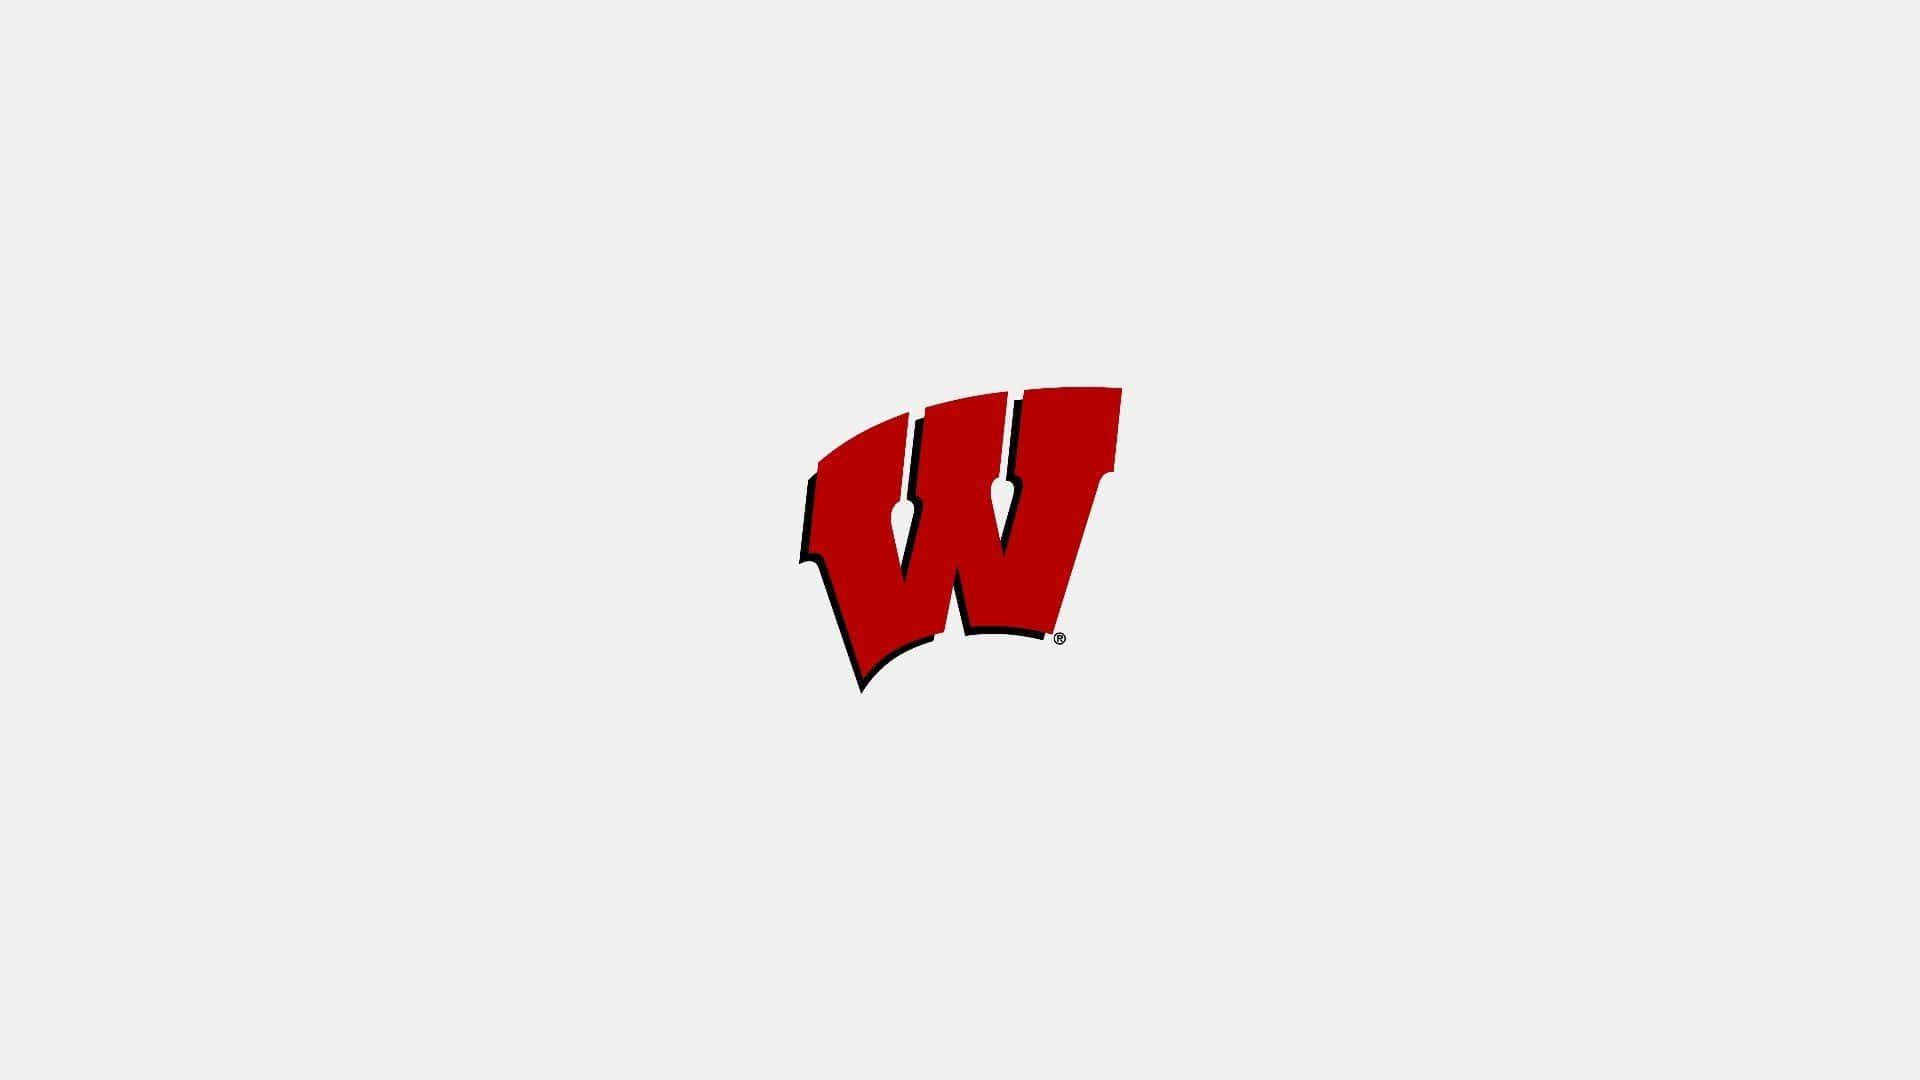 The Wisconsin Badgers football team in action on the field Wallpaper